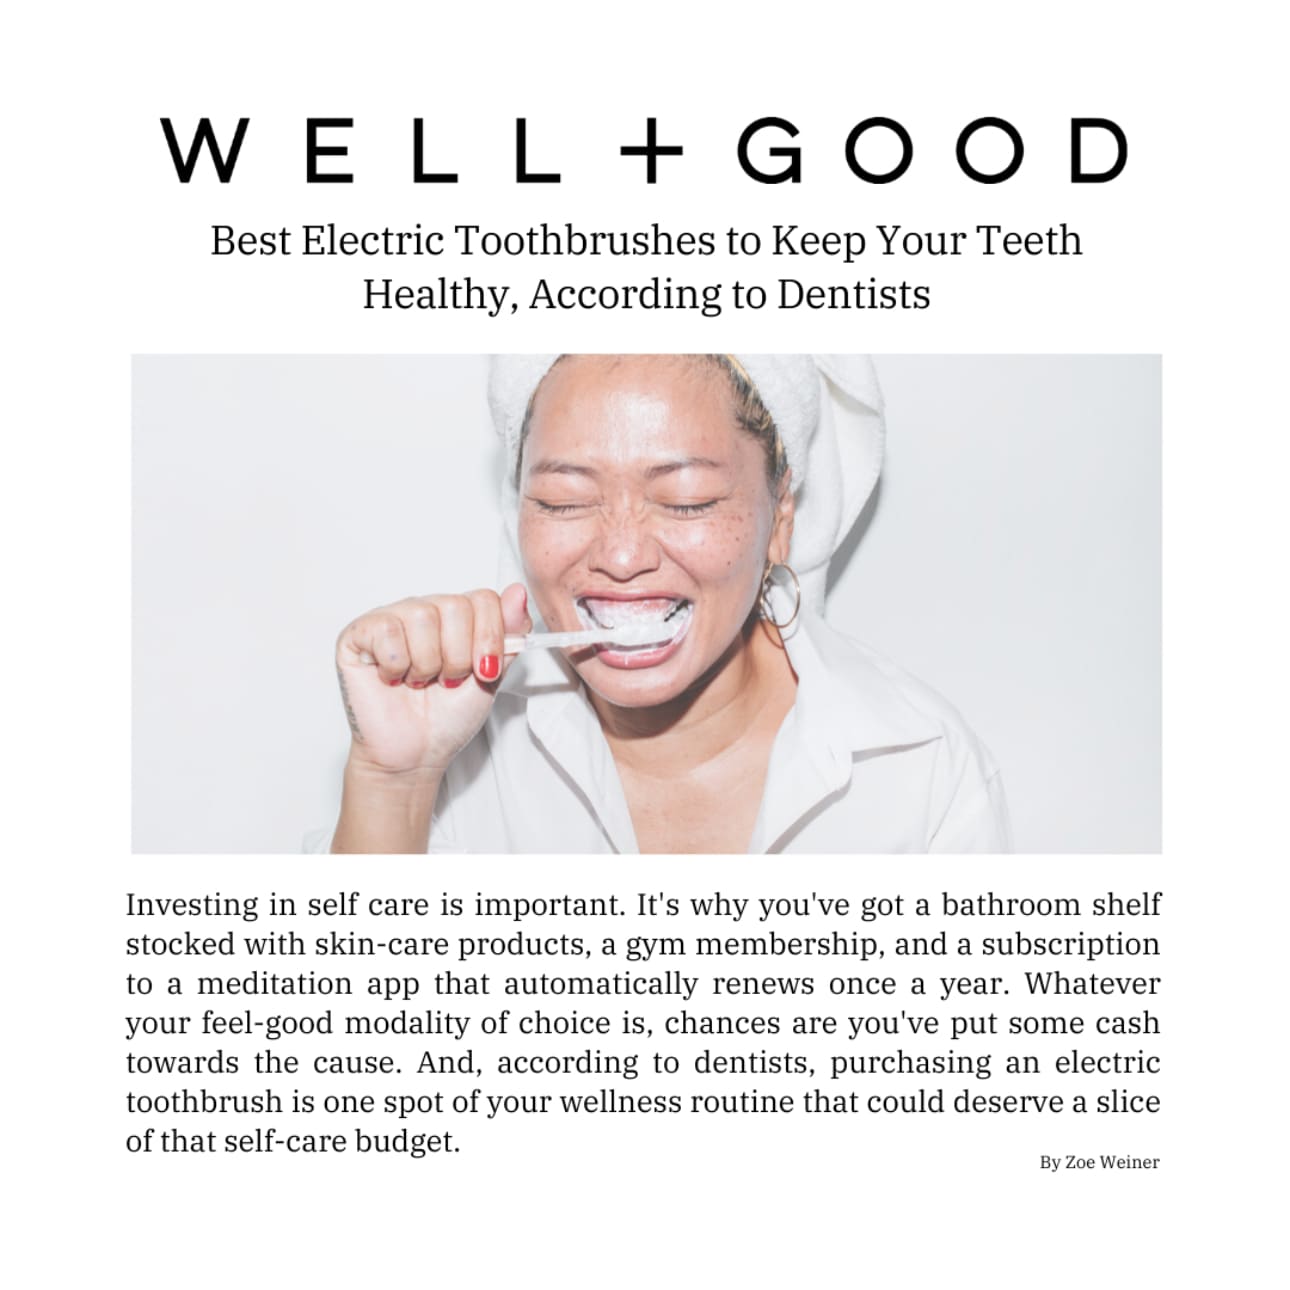 Best Electric Toothbrushes to Keep Your Teeth Healthy, According to Dentists